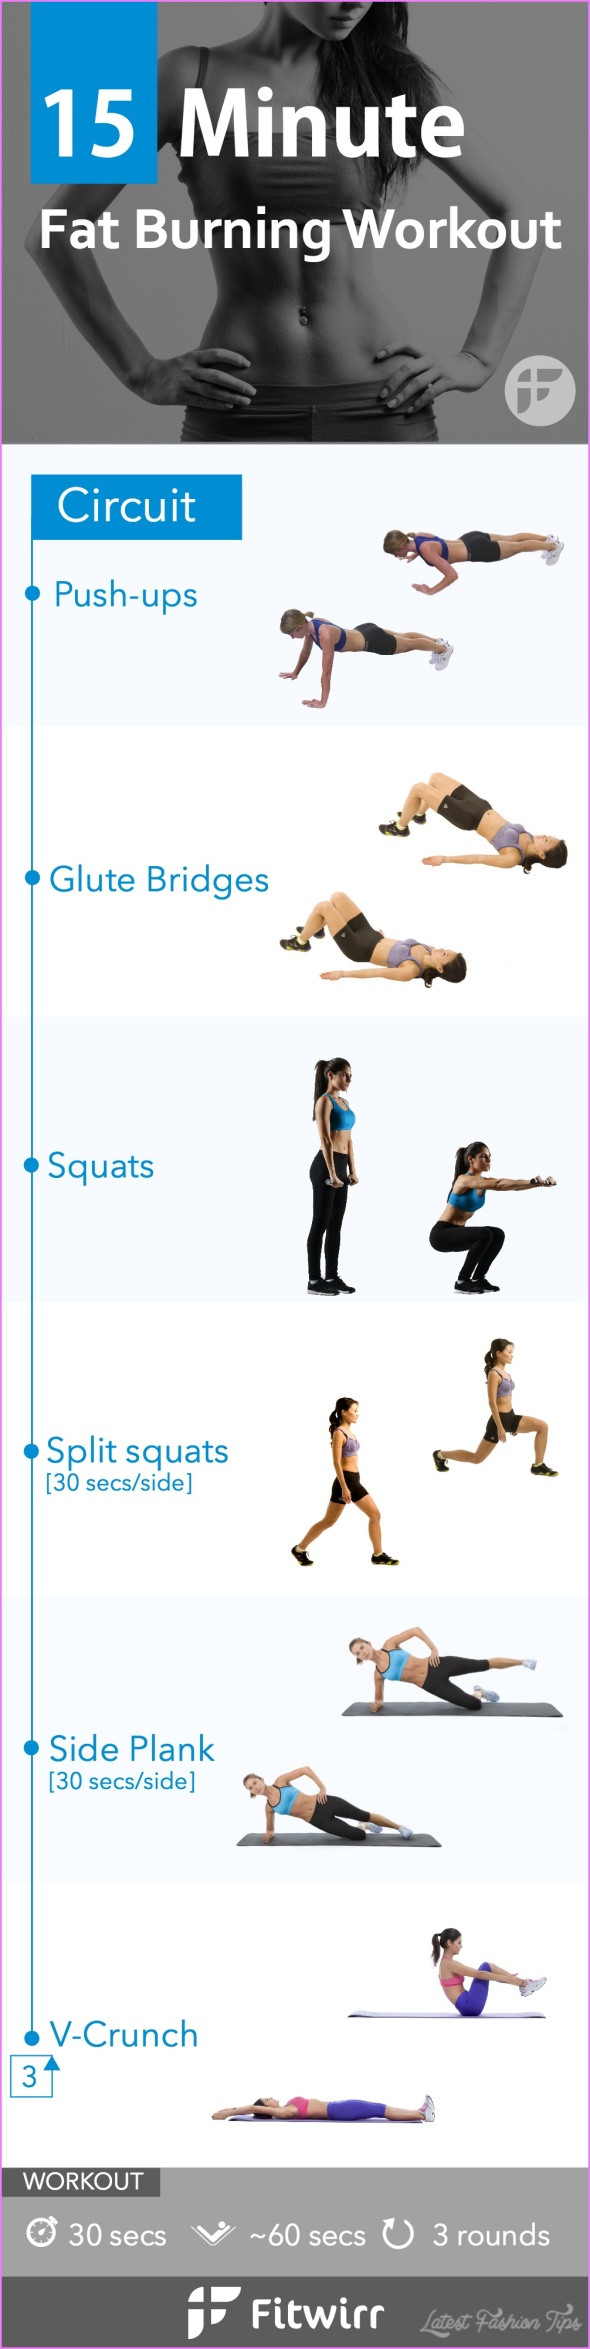 Weight Loss Exercises At Home For Women For Beginners
 Best Weight Loss Exercises For Women LatestFashionTips